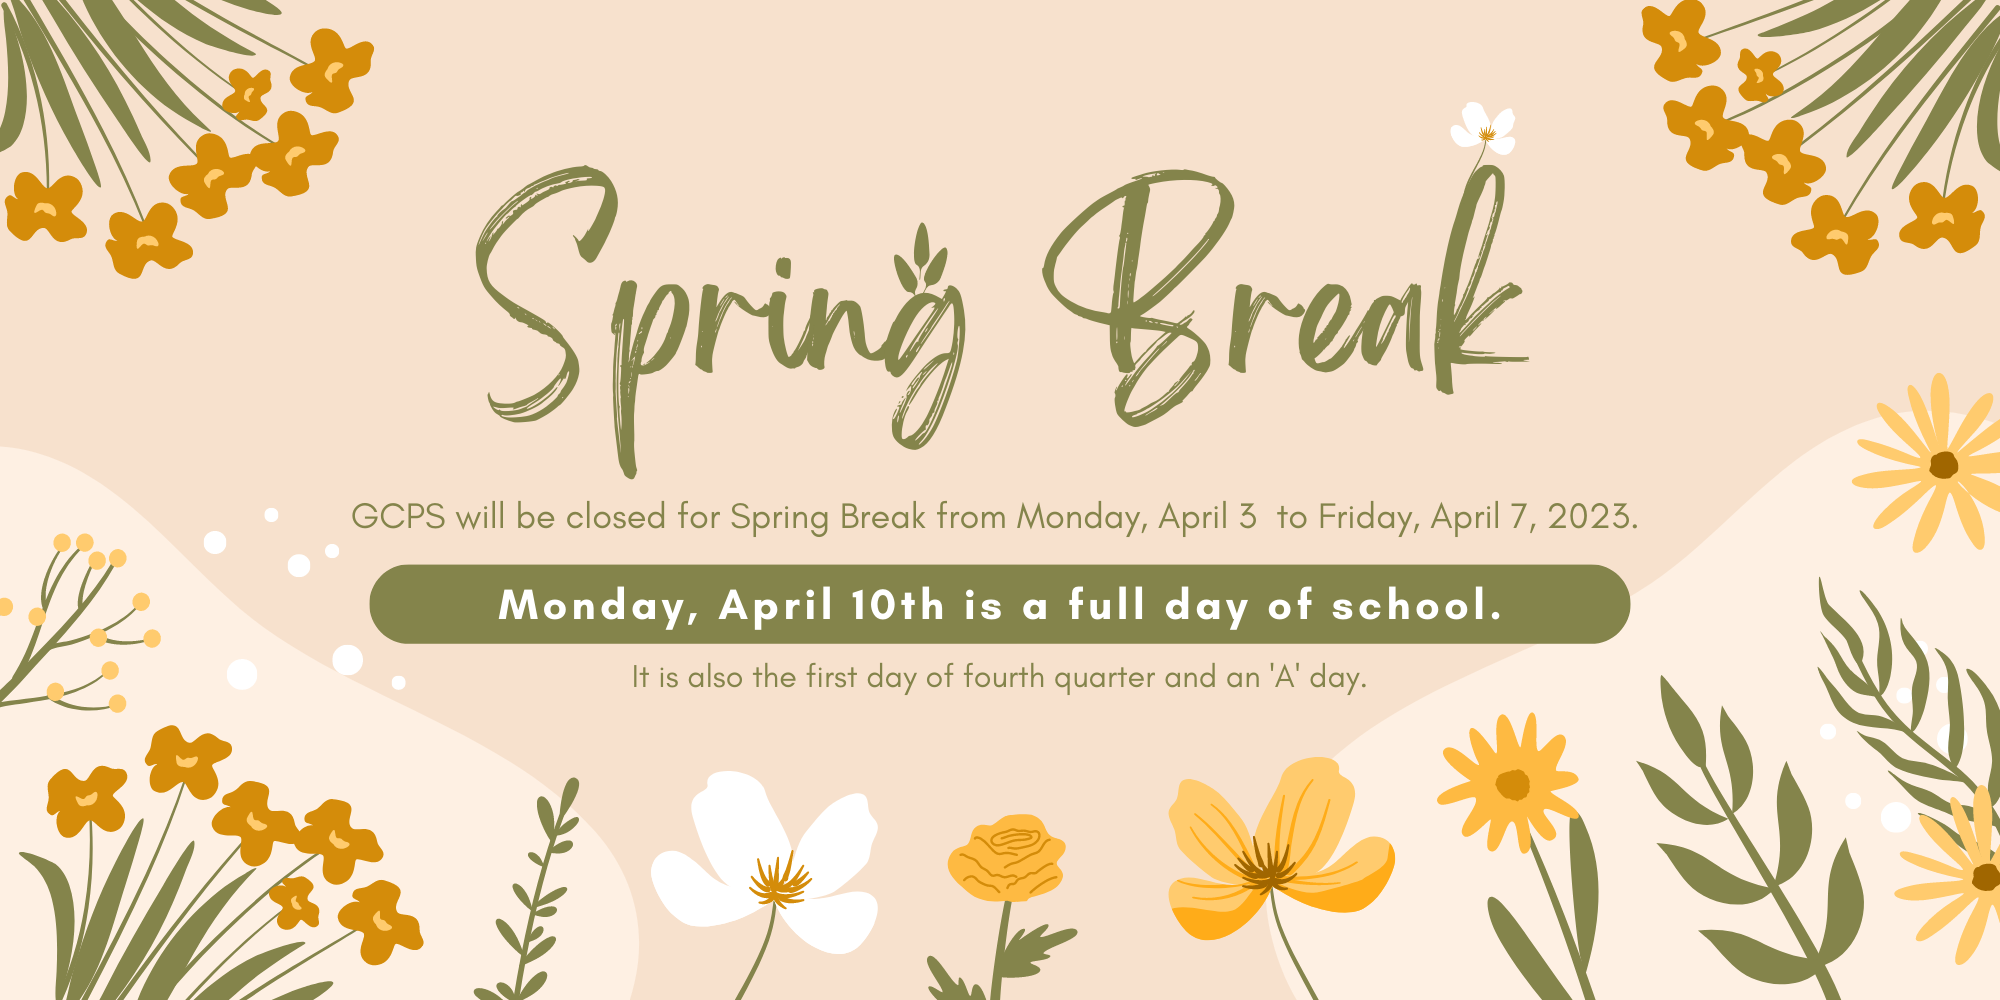 Spring Break GCPS will be closed for Spring Break from Monday April 3 to Friday, April 7, 2023. Monday April 10th is a full day of school. It is also the first day of fourth quarter and an A day.